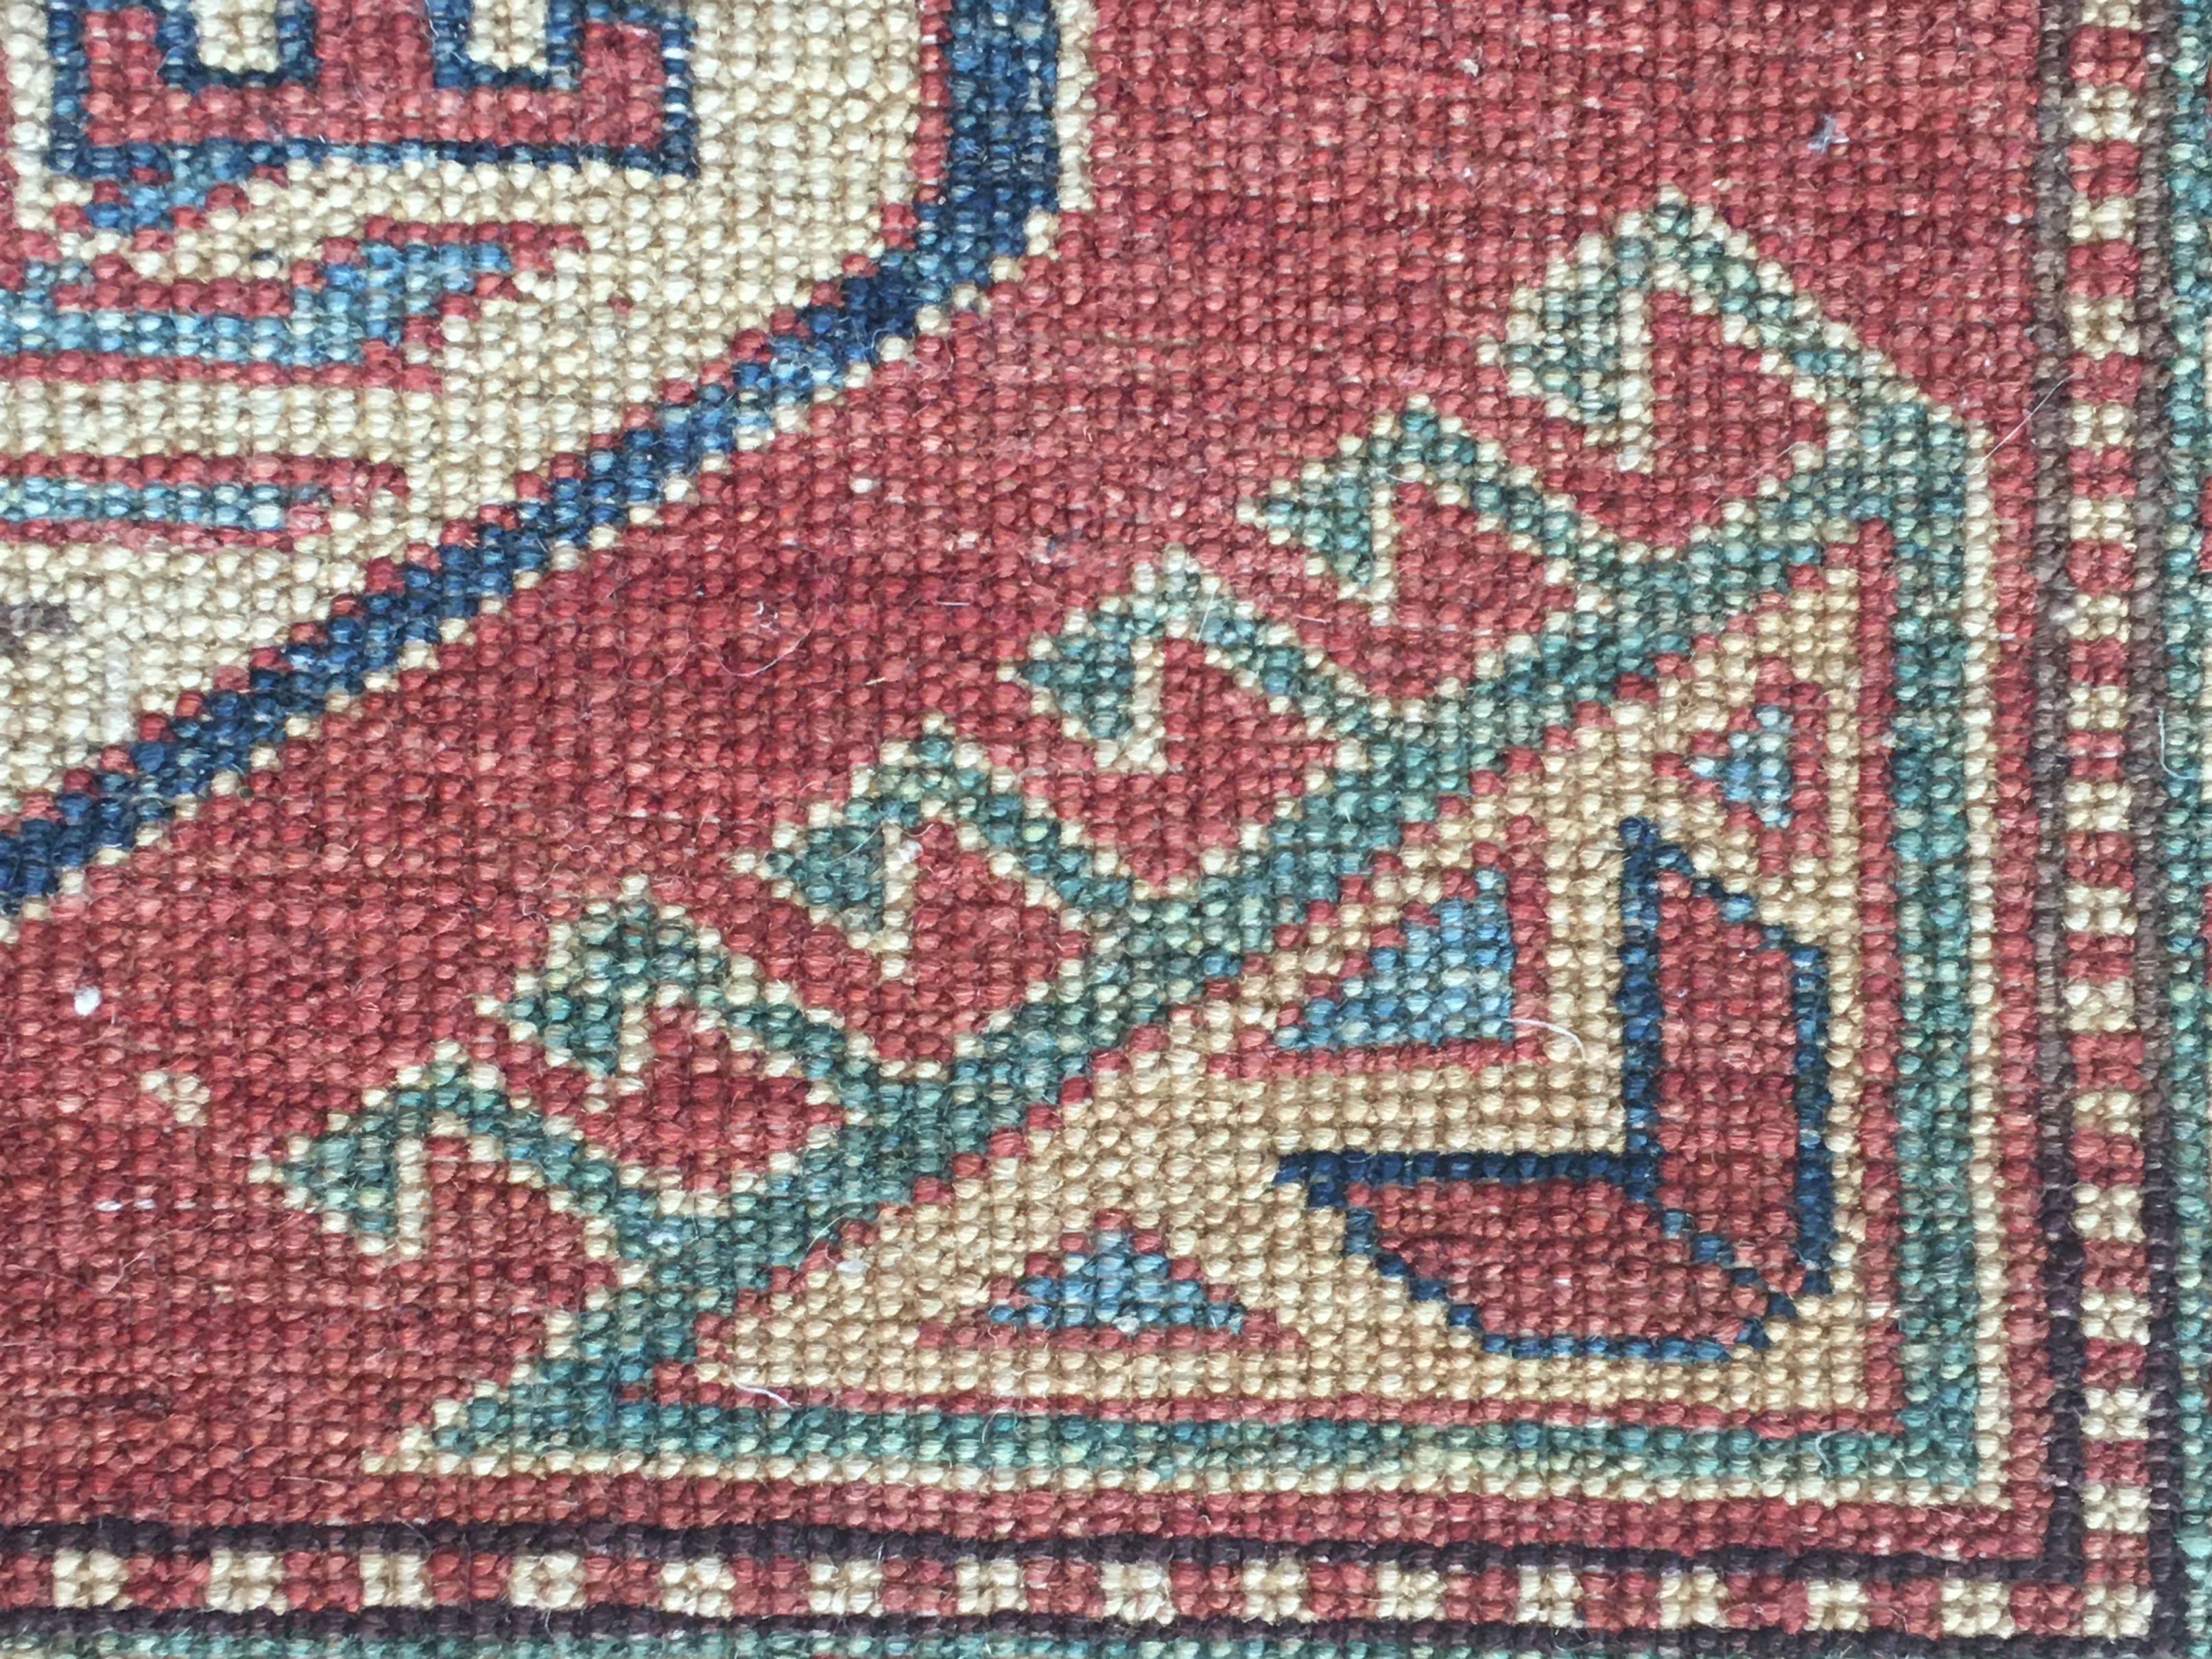 Detailed photo of corner rug knots from the back side showing intricate geometric patterns